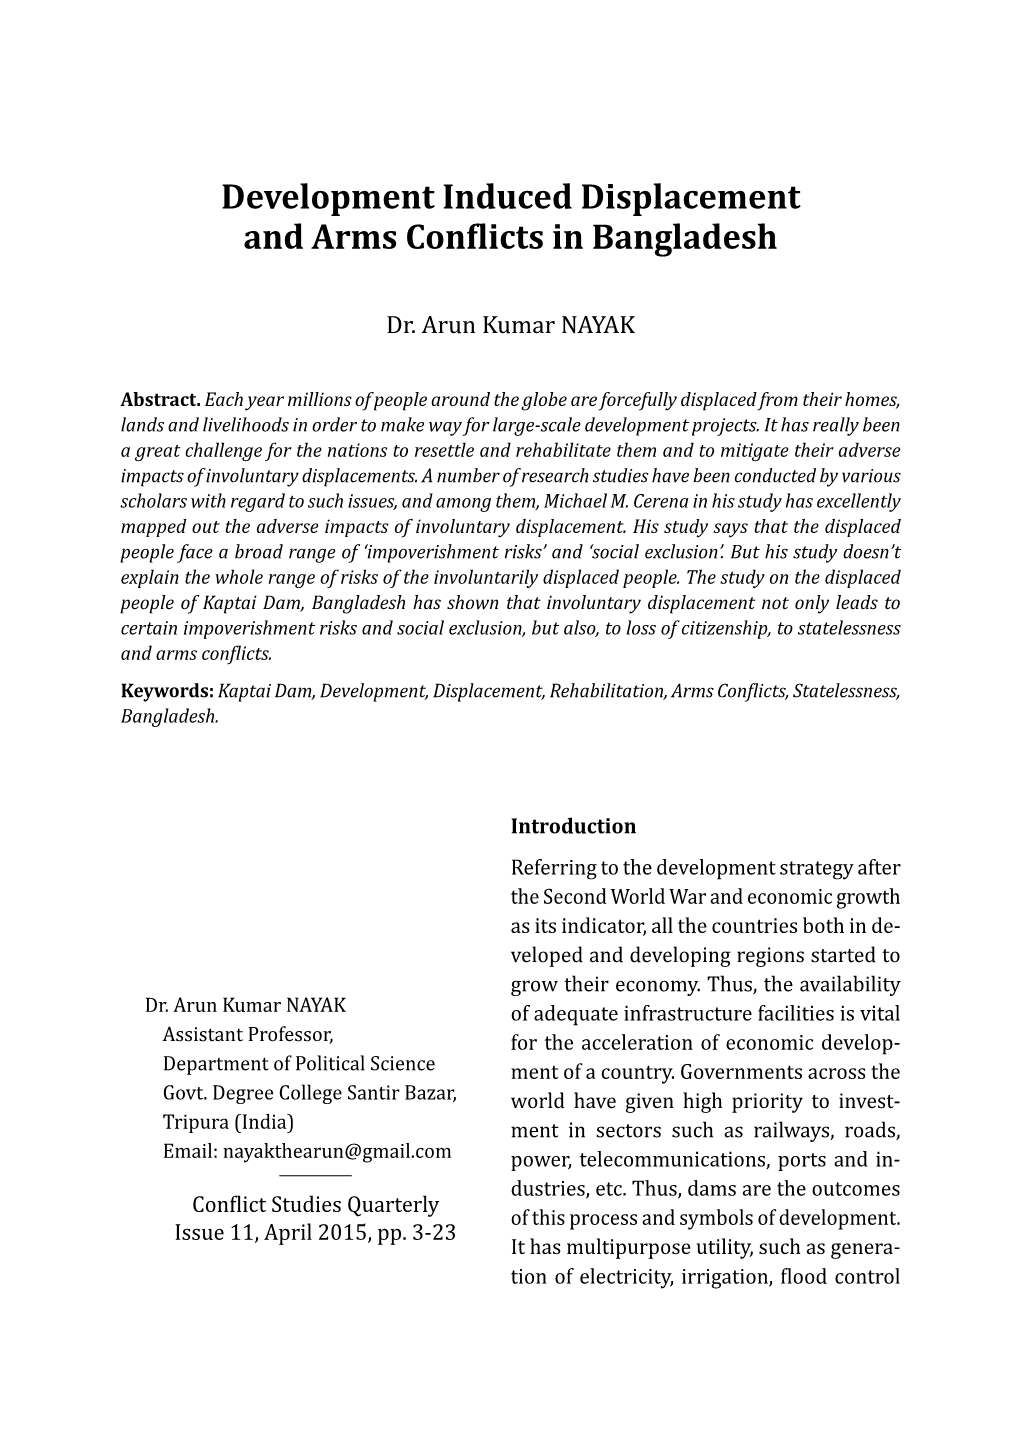 Development Induced Displacement and Arms Conϐlicts in Bangladesh